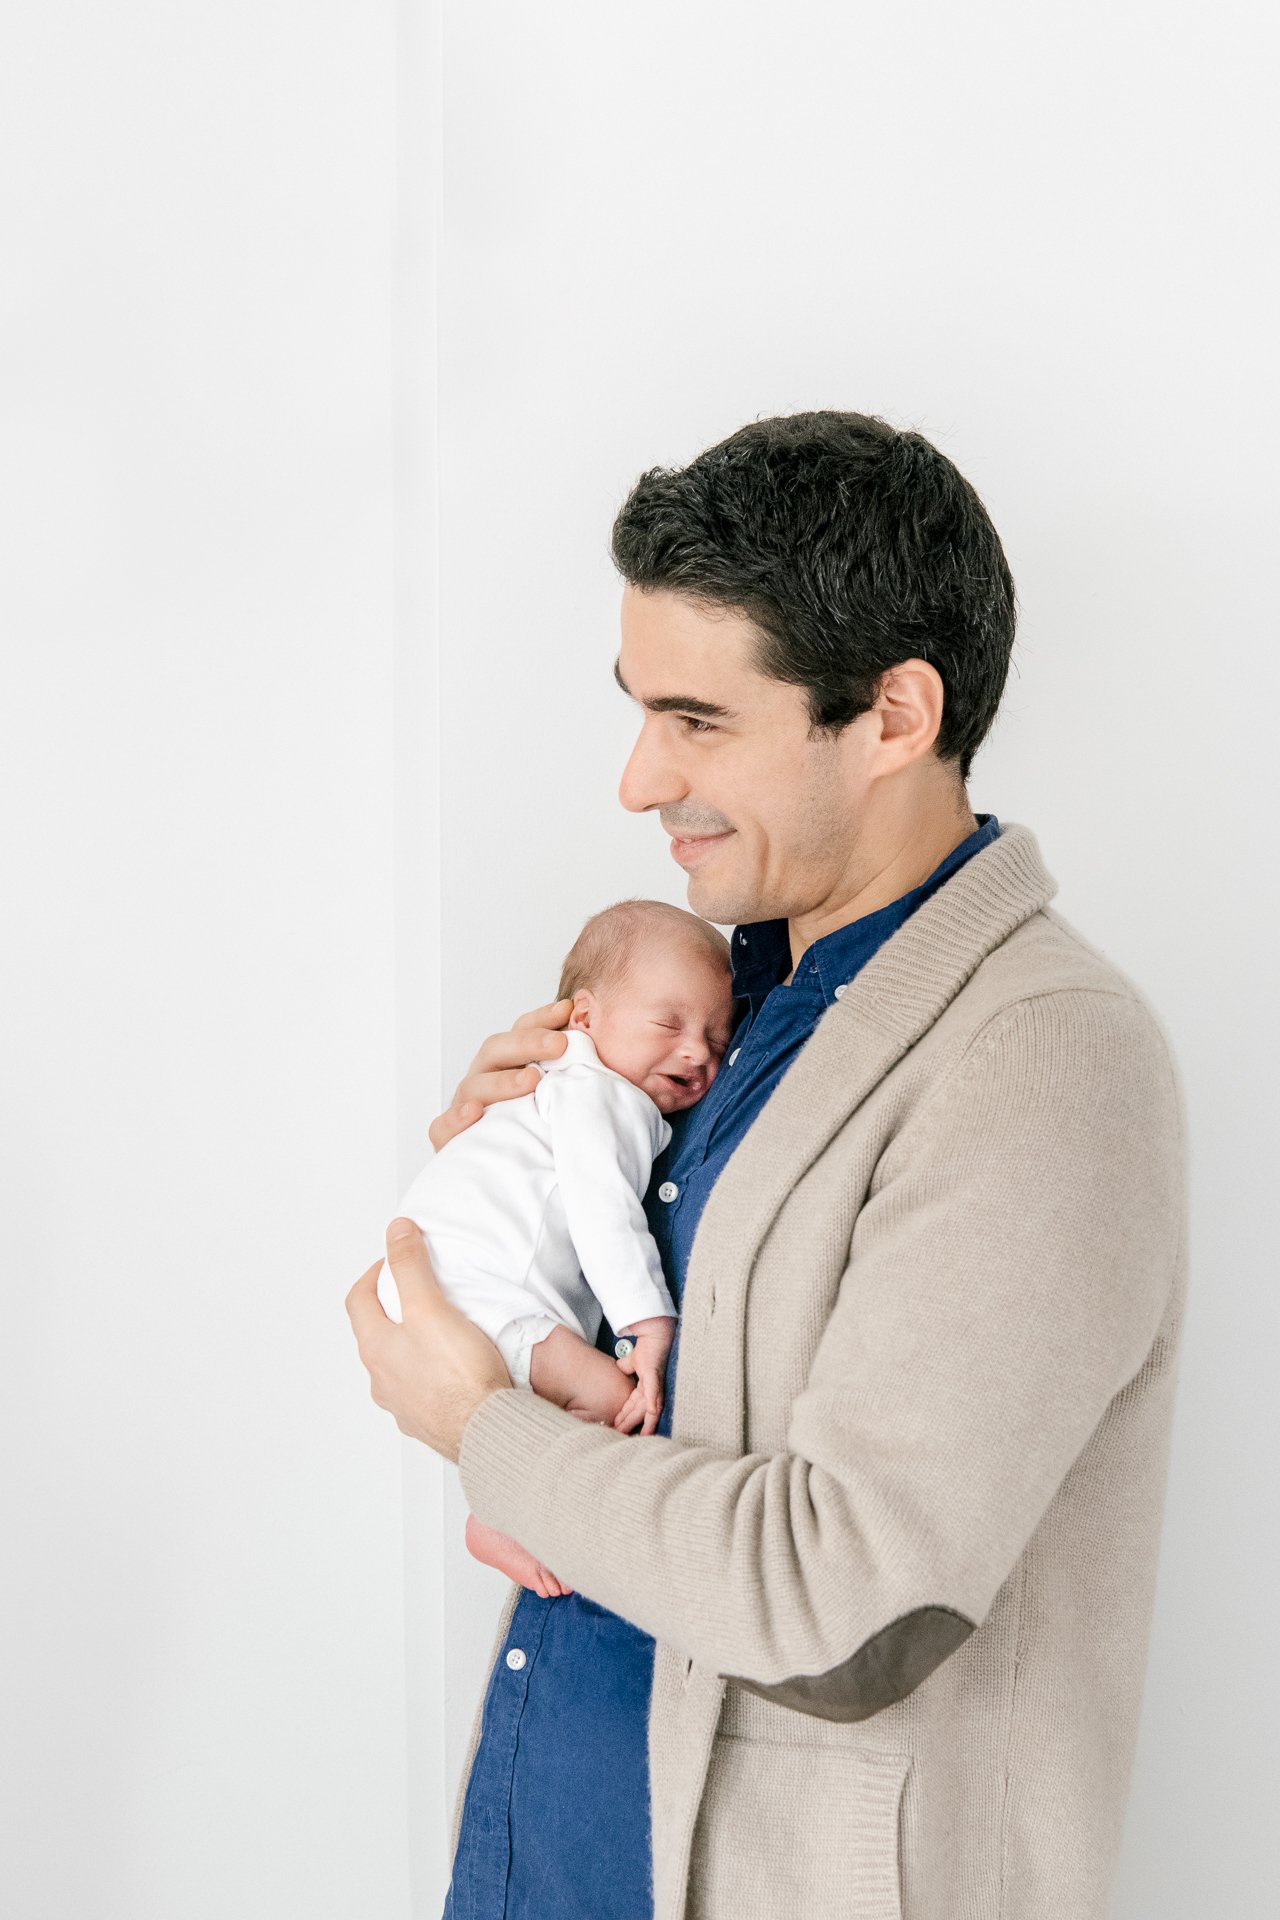  Handsome dad holds his newborn cradled into his chest during a portrait session with Nicole Hawkins Photography, a newborn photographer located in New Jersey.&nbsp; #twinnewbornsessions #NicoleHawkinsphotography #newbornportraits #newbornstudioshoot